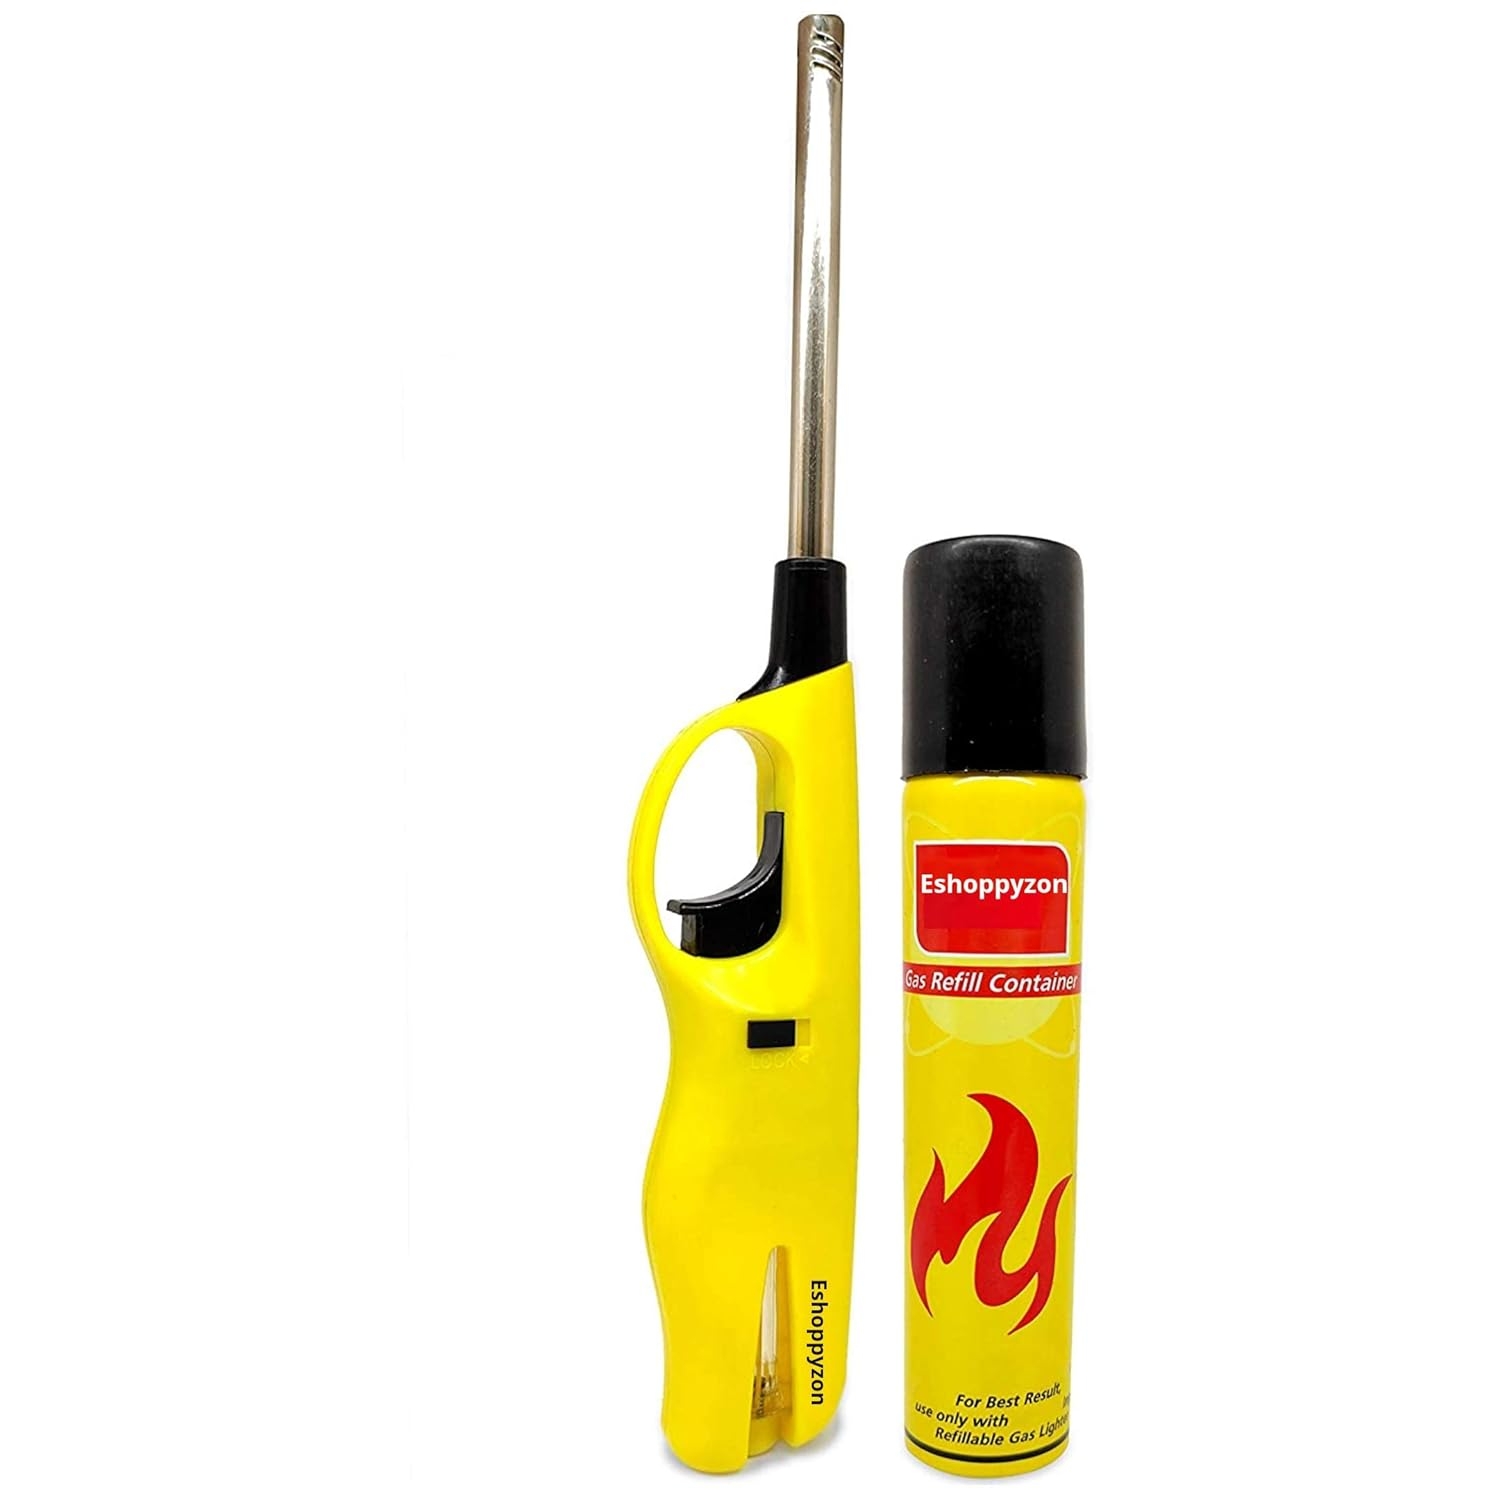 Eshoppyzon Refillable Adjustable Flame Kitchen Gas Stove Lighter with 100ml Refill Bottle (Yellow- Plastic) Gas Lighters